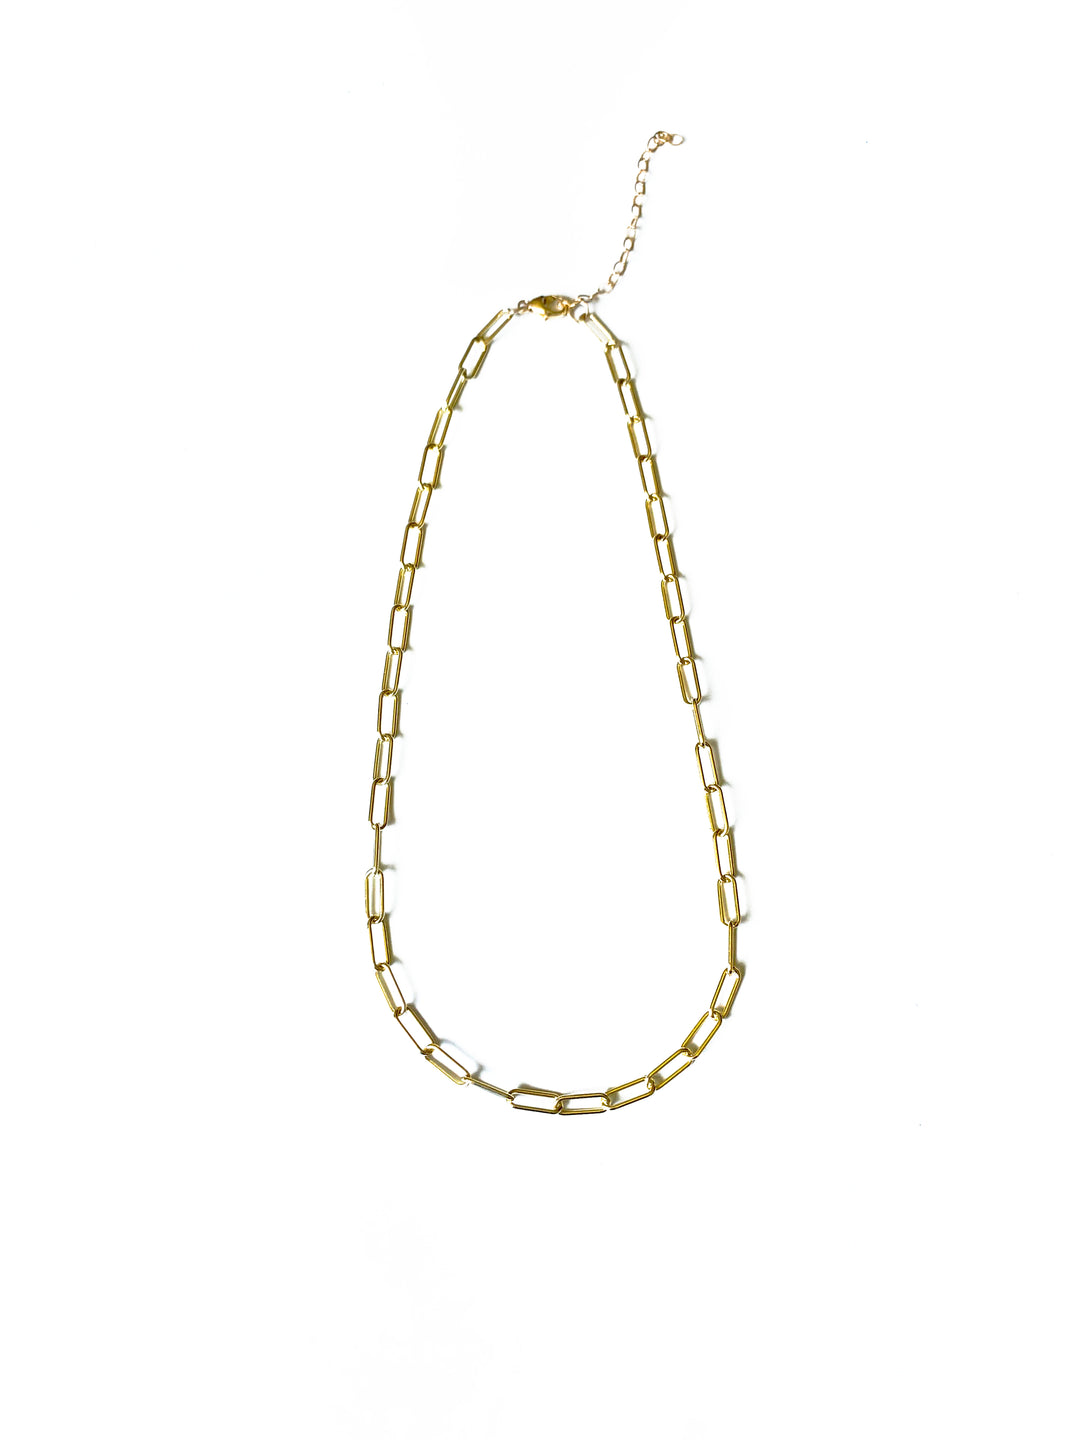 Gold Layering Chain - Kingfisher Road - Online Boutique